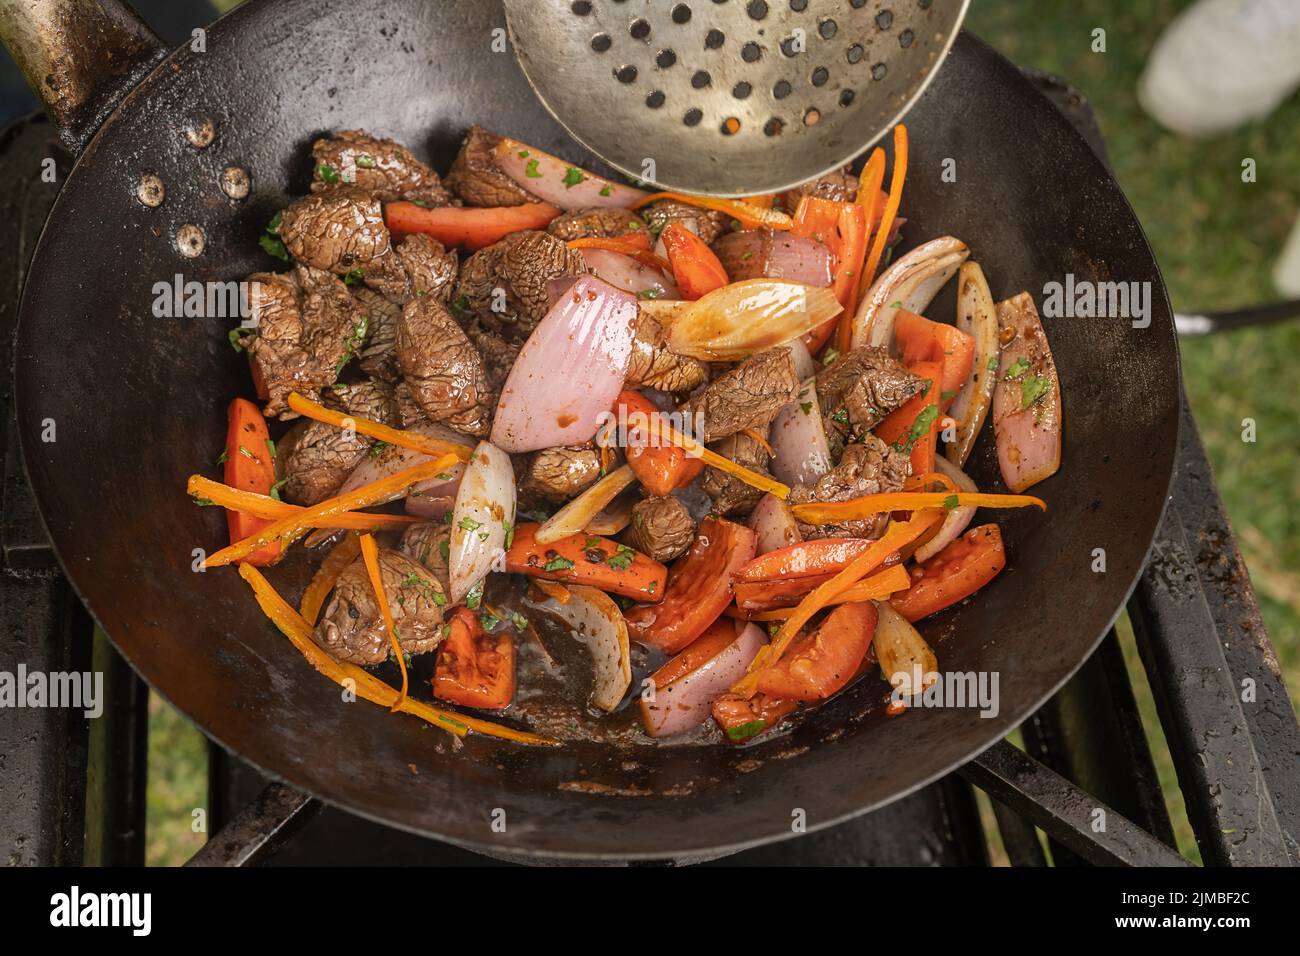 Top view of a pan with meat and veggies on a portable stove in a garden Stock Photo